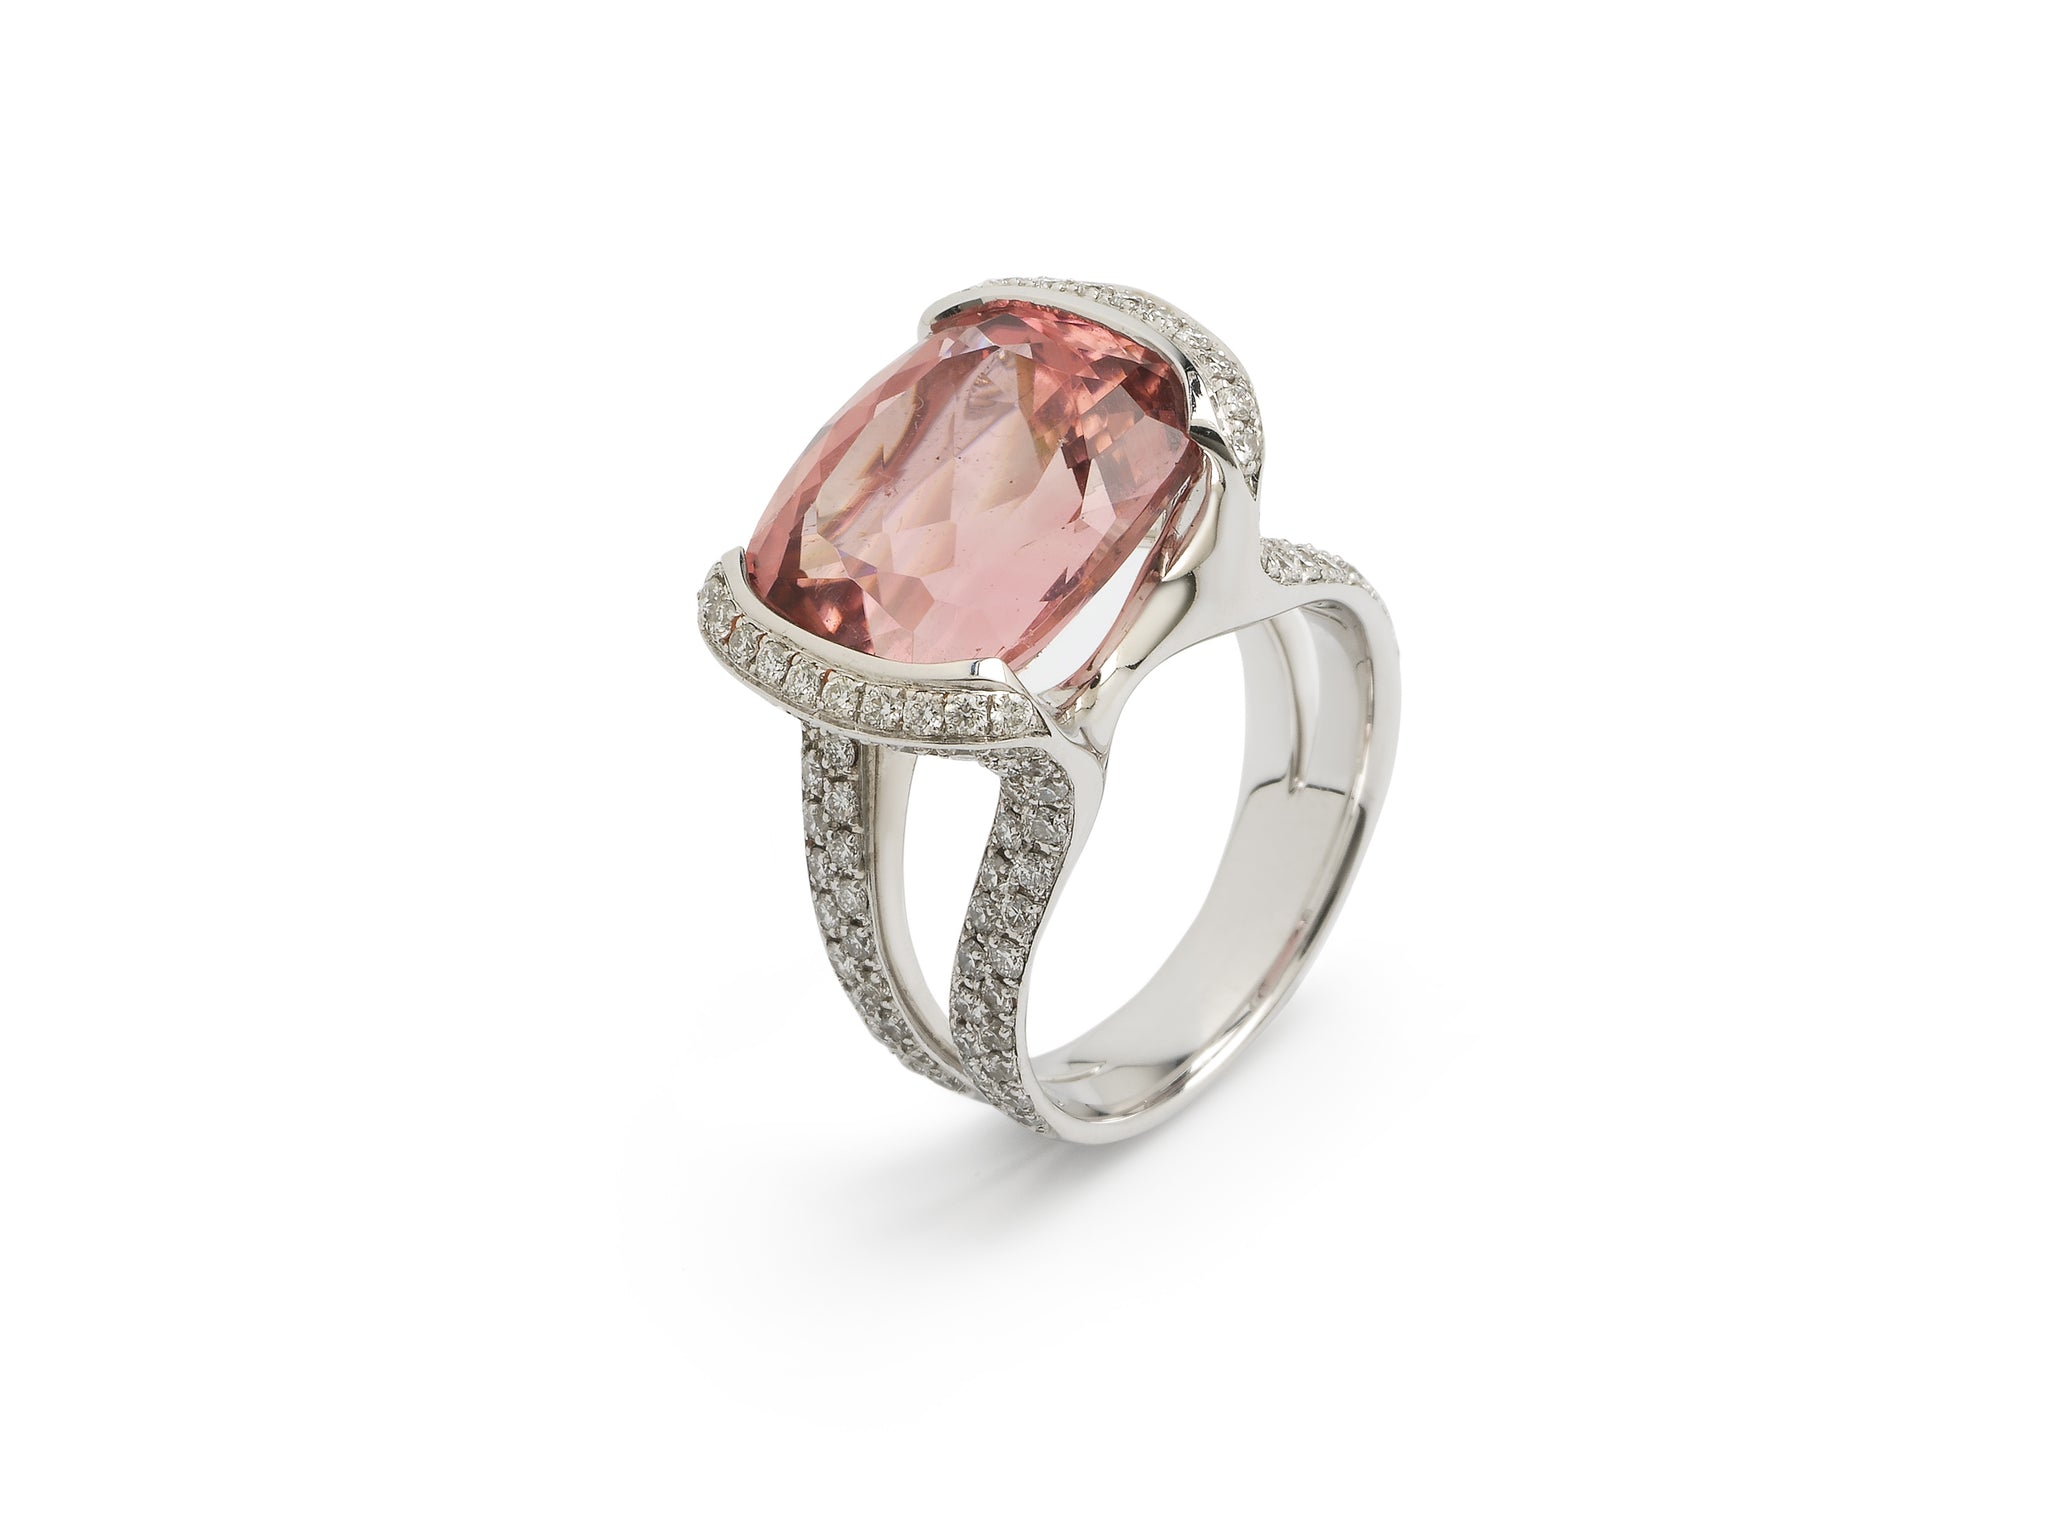 18 krt white gold ring set with a pink Tourmaline and 130 brilliant diamonds